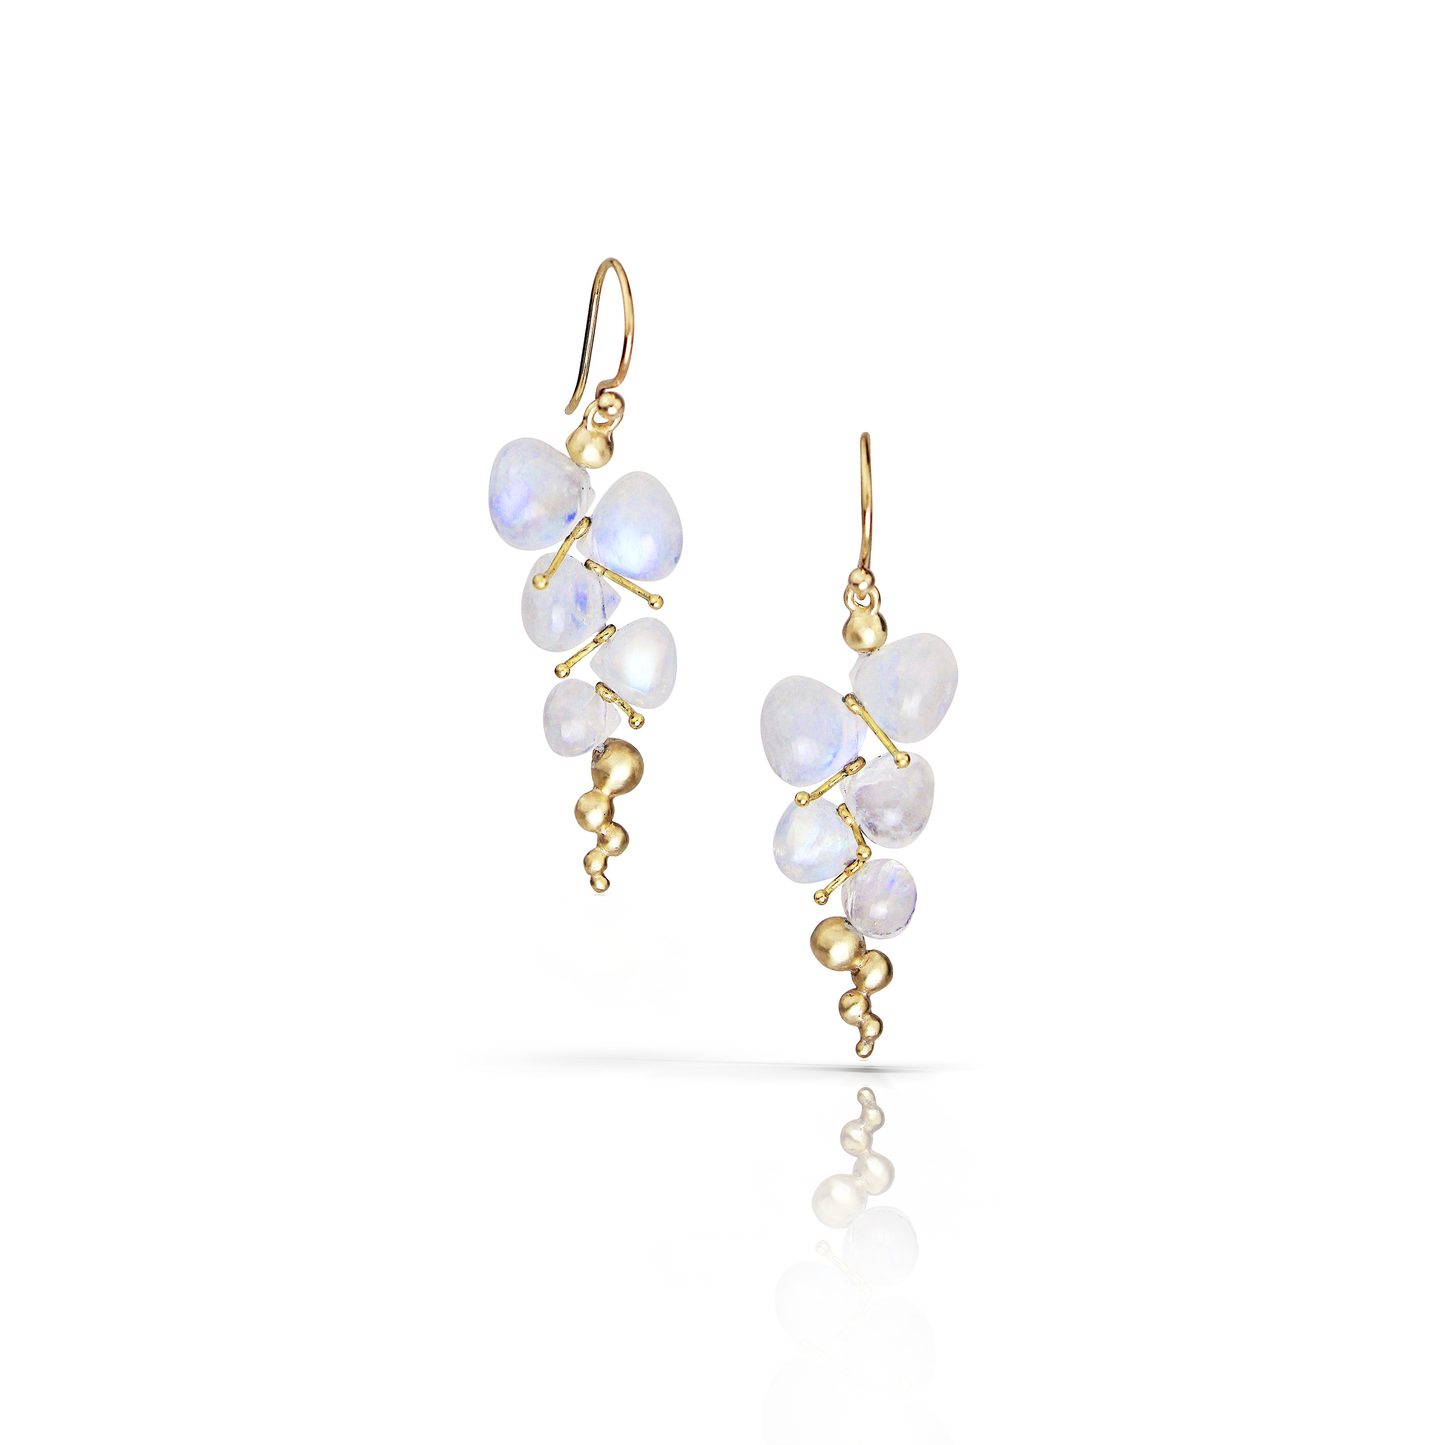 Small Caviar Earrings in 14k Yellow Gold and Rainbow Moonstones